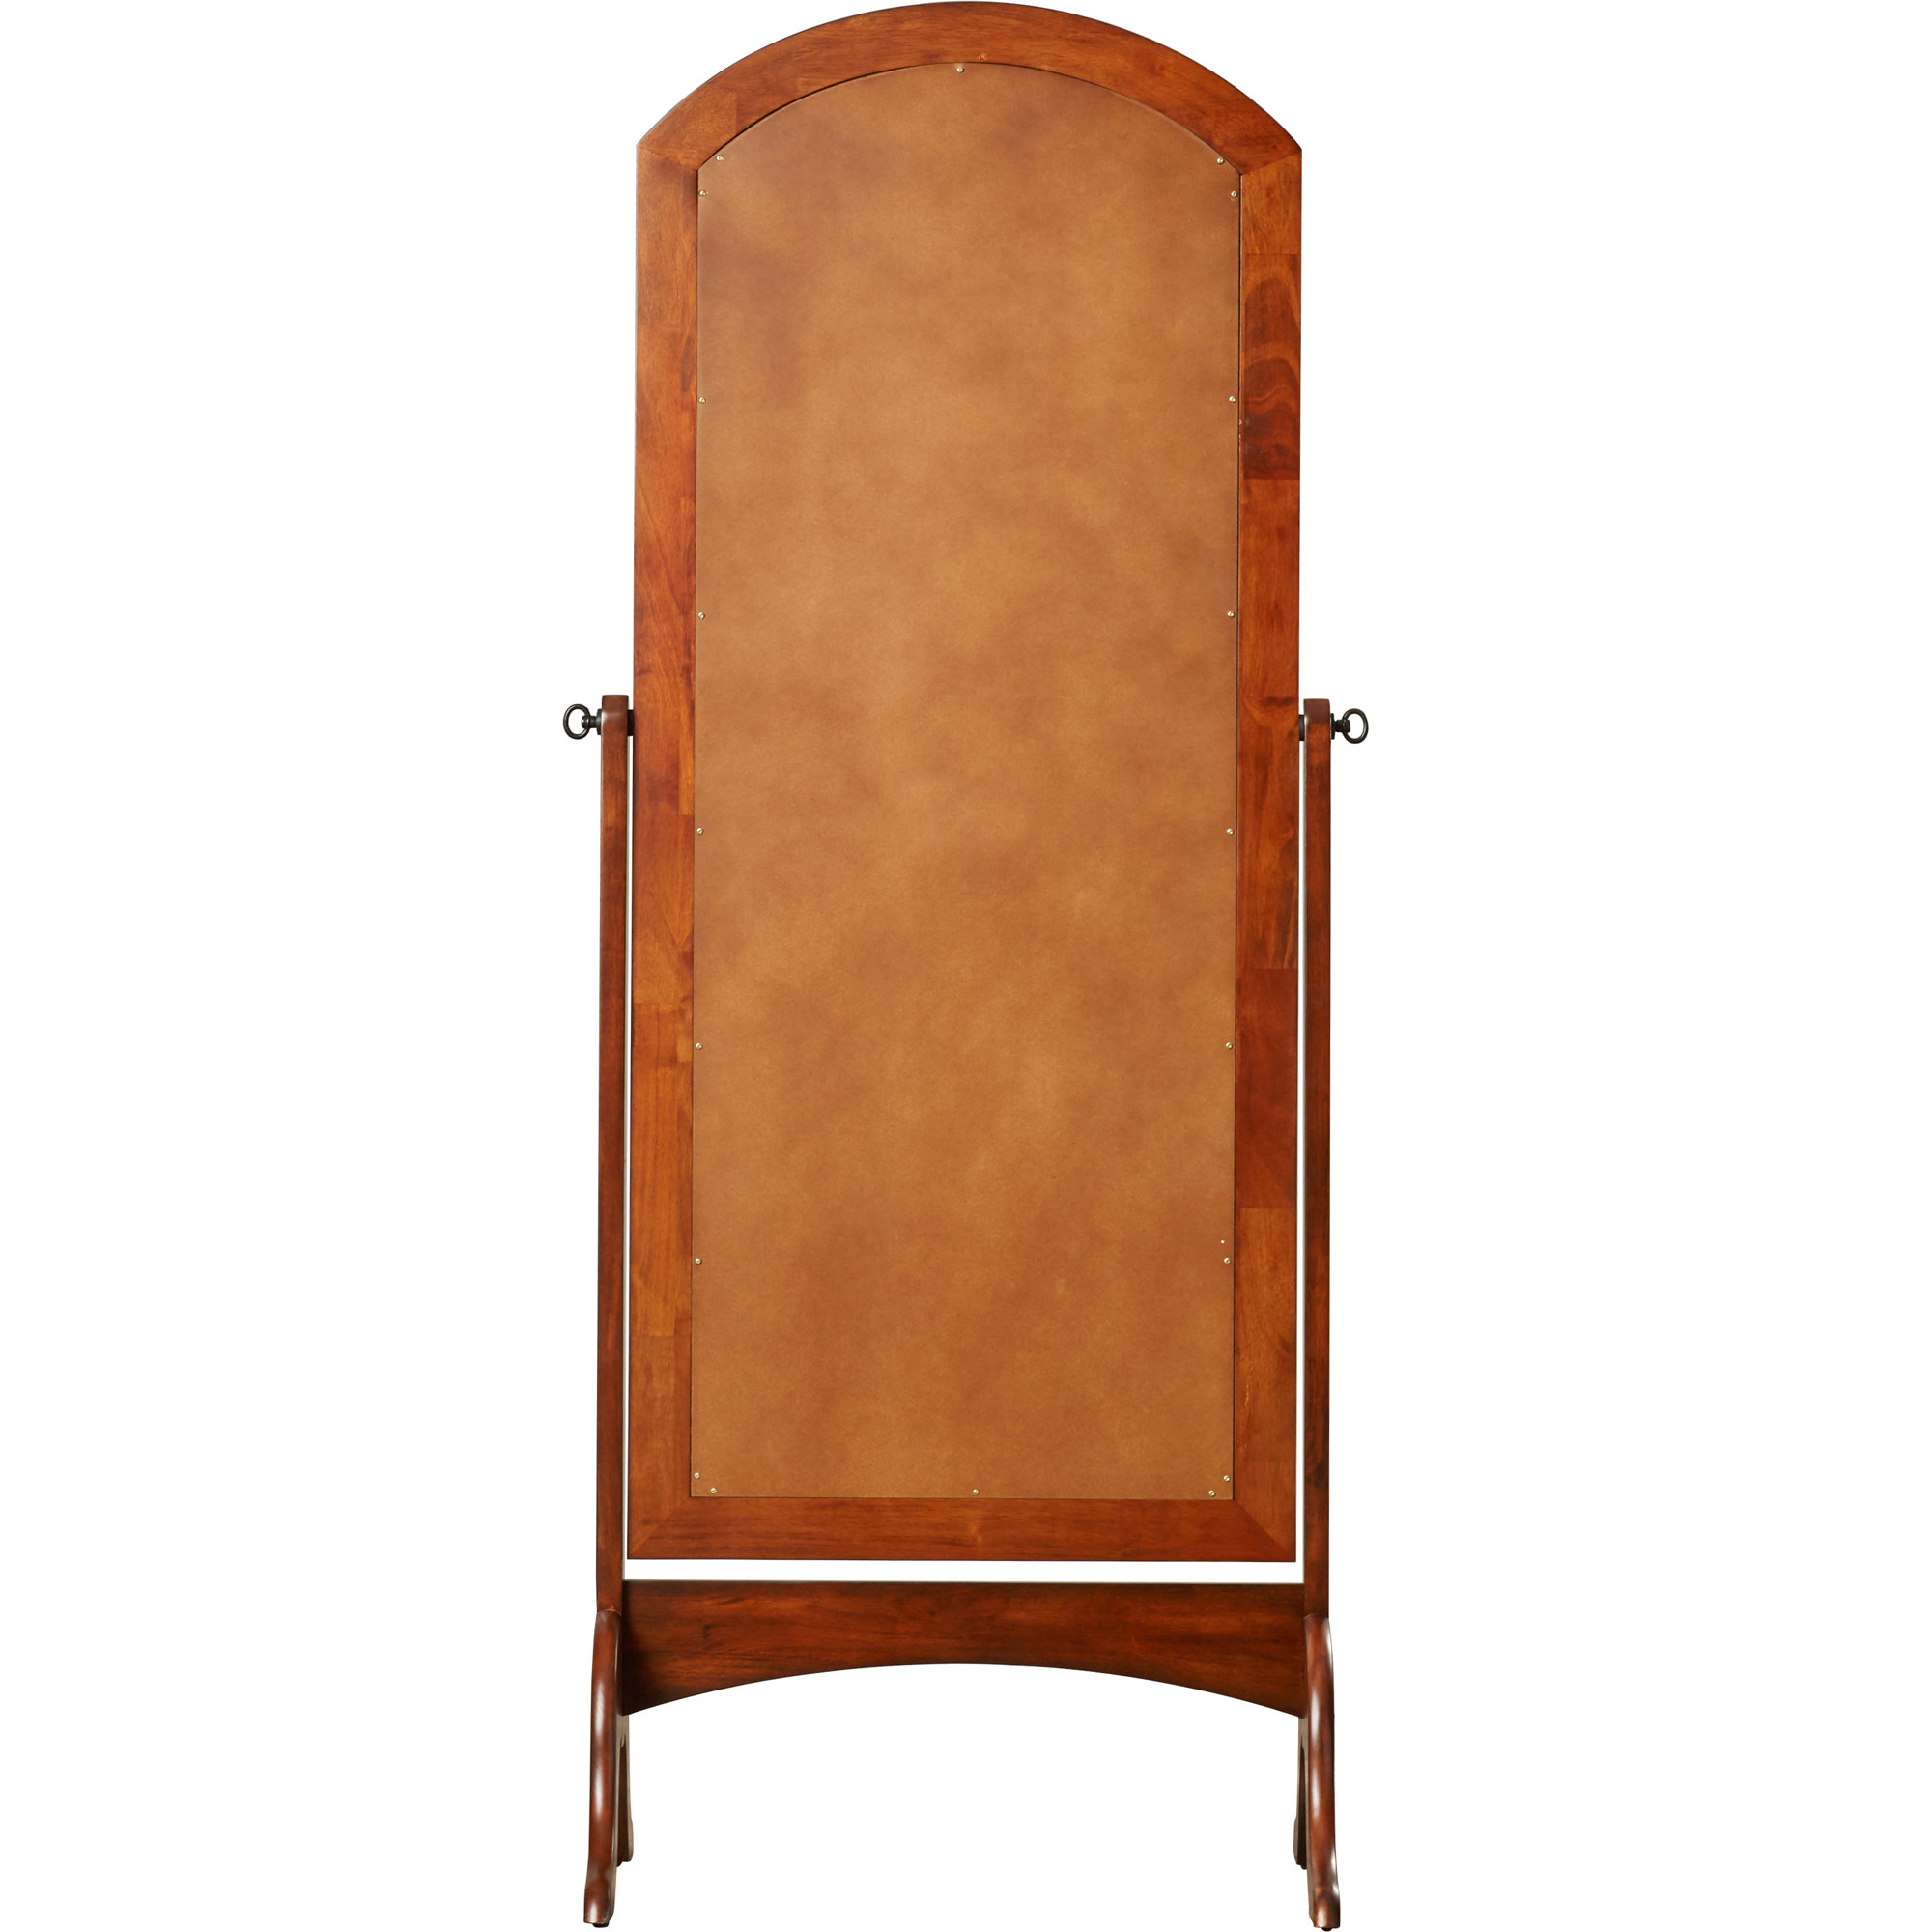 Darby Home Co Cheval Mirror & Reviews | Wayfair